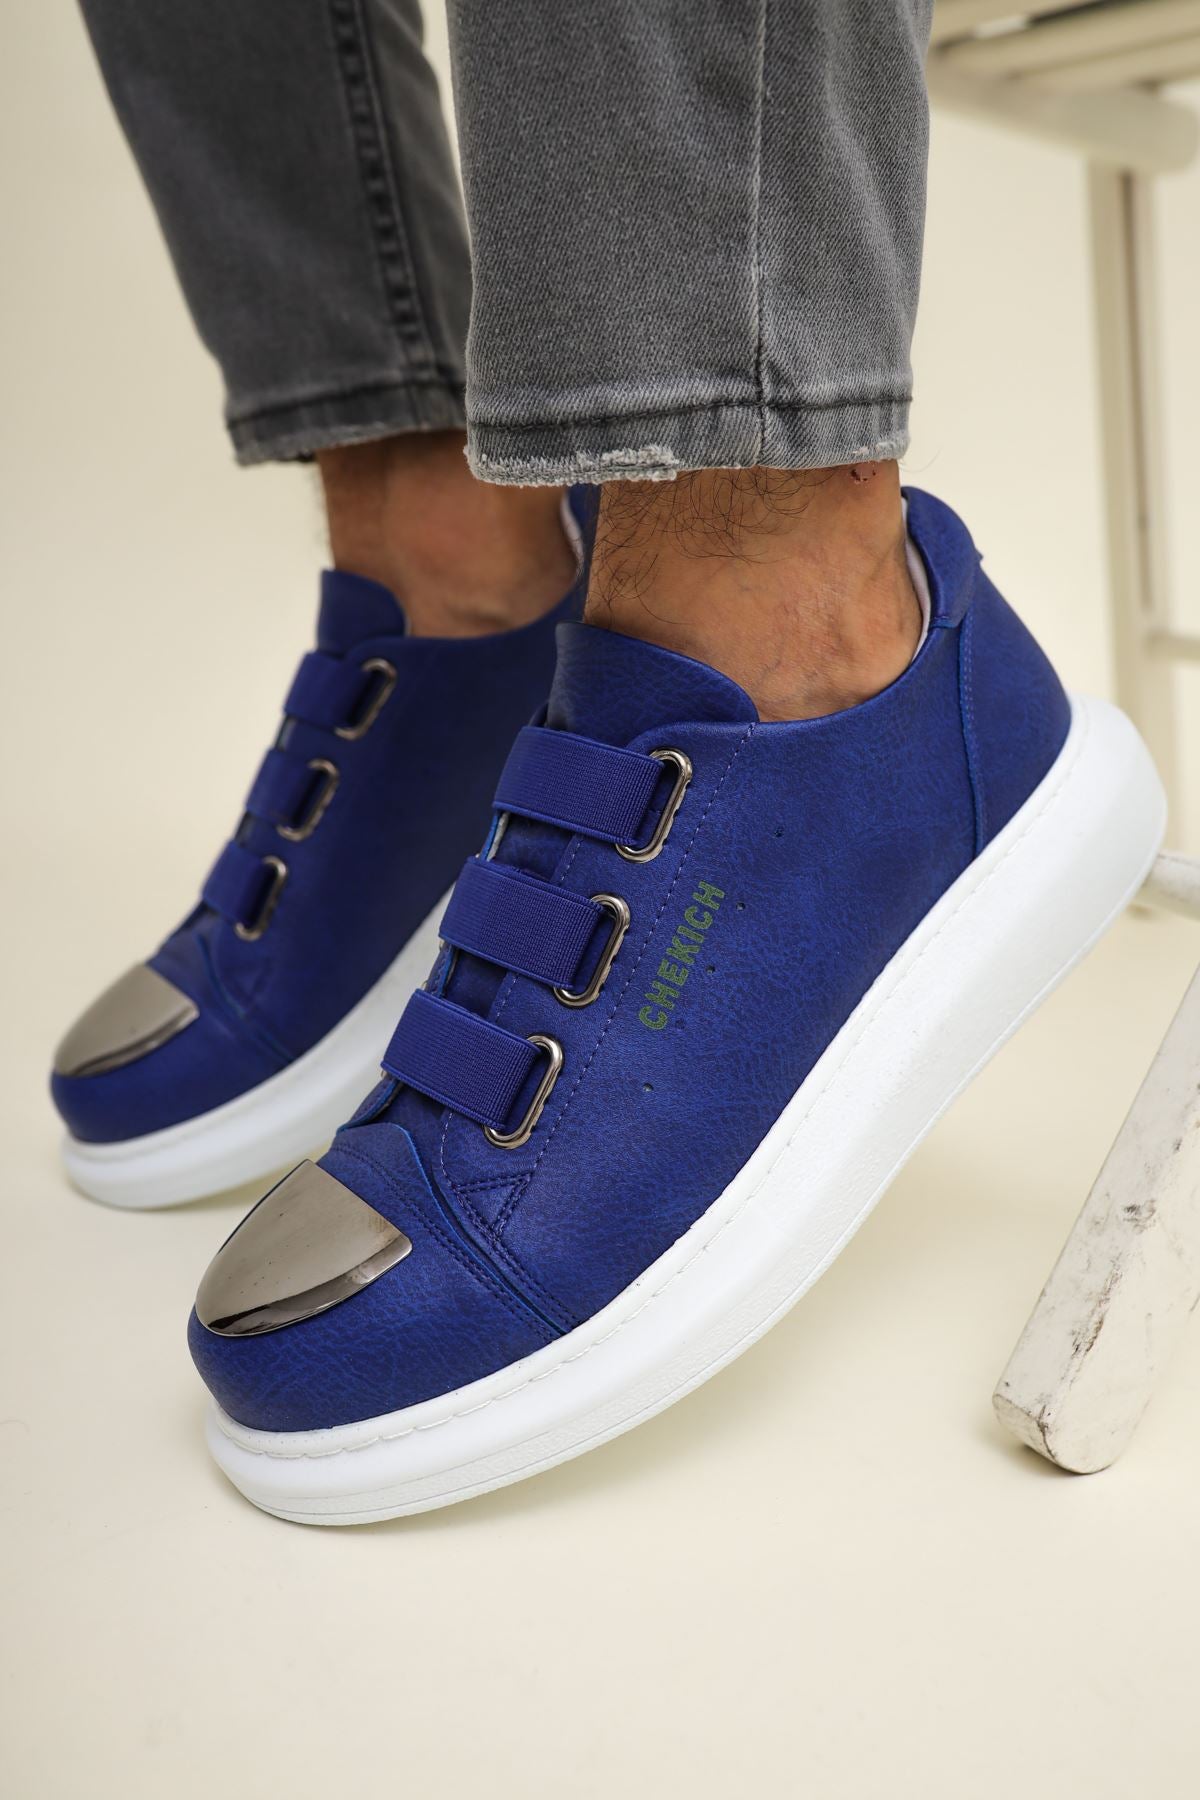 CH251 BT Men's Sneakers Shoes Sax Blue - STREETMODE ™